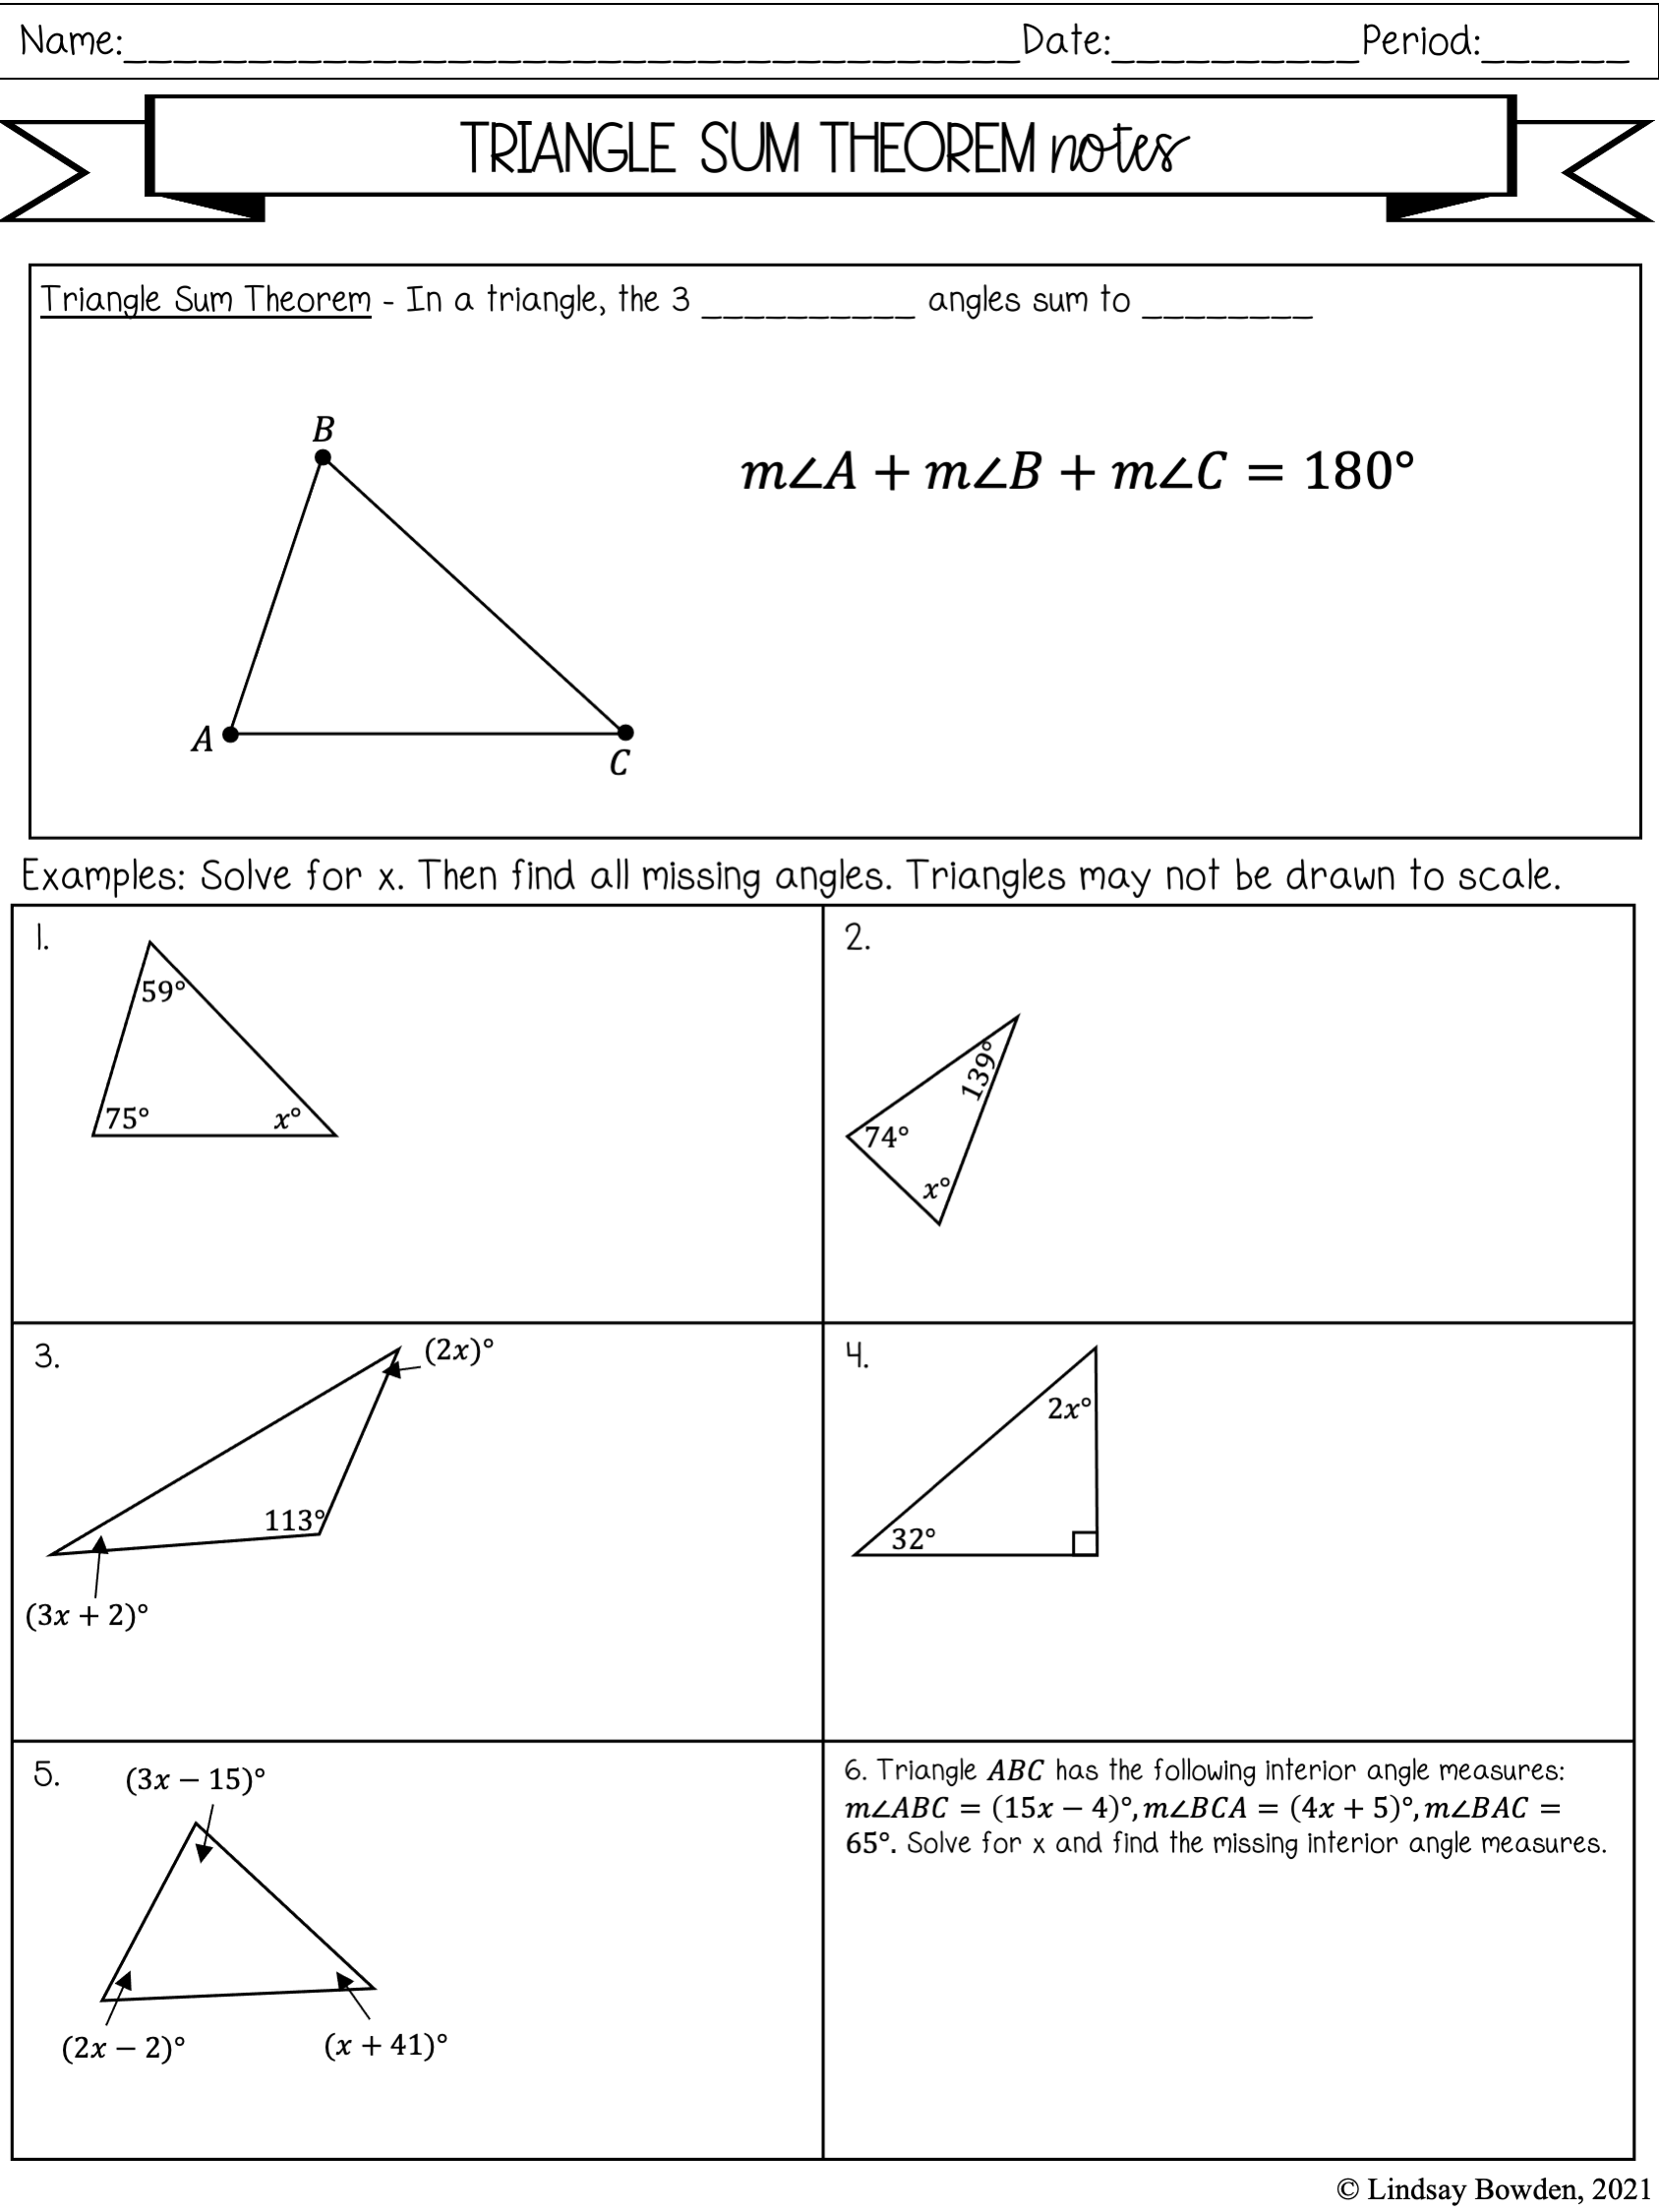 Triangle Sum Theorem Notes and Worksheets - Lindsay Bowden In Triangle Angle Sum Worksheet Answers